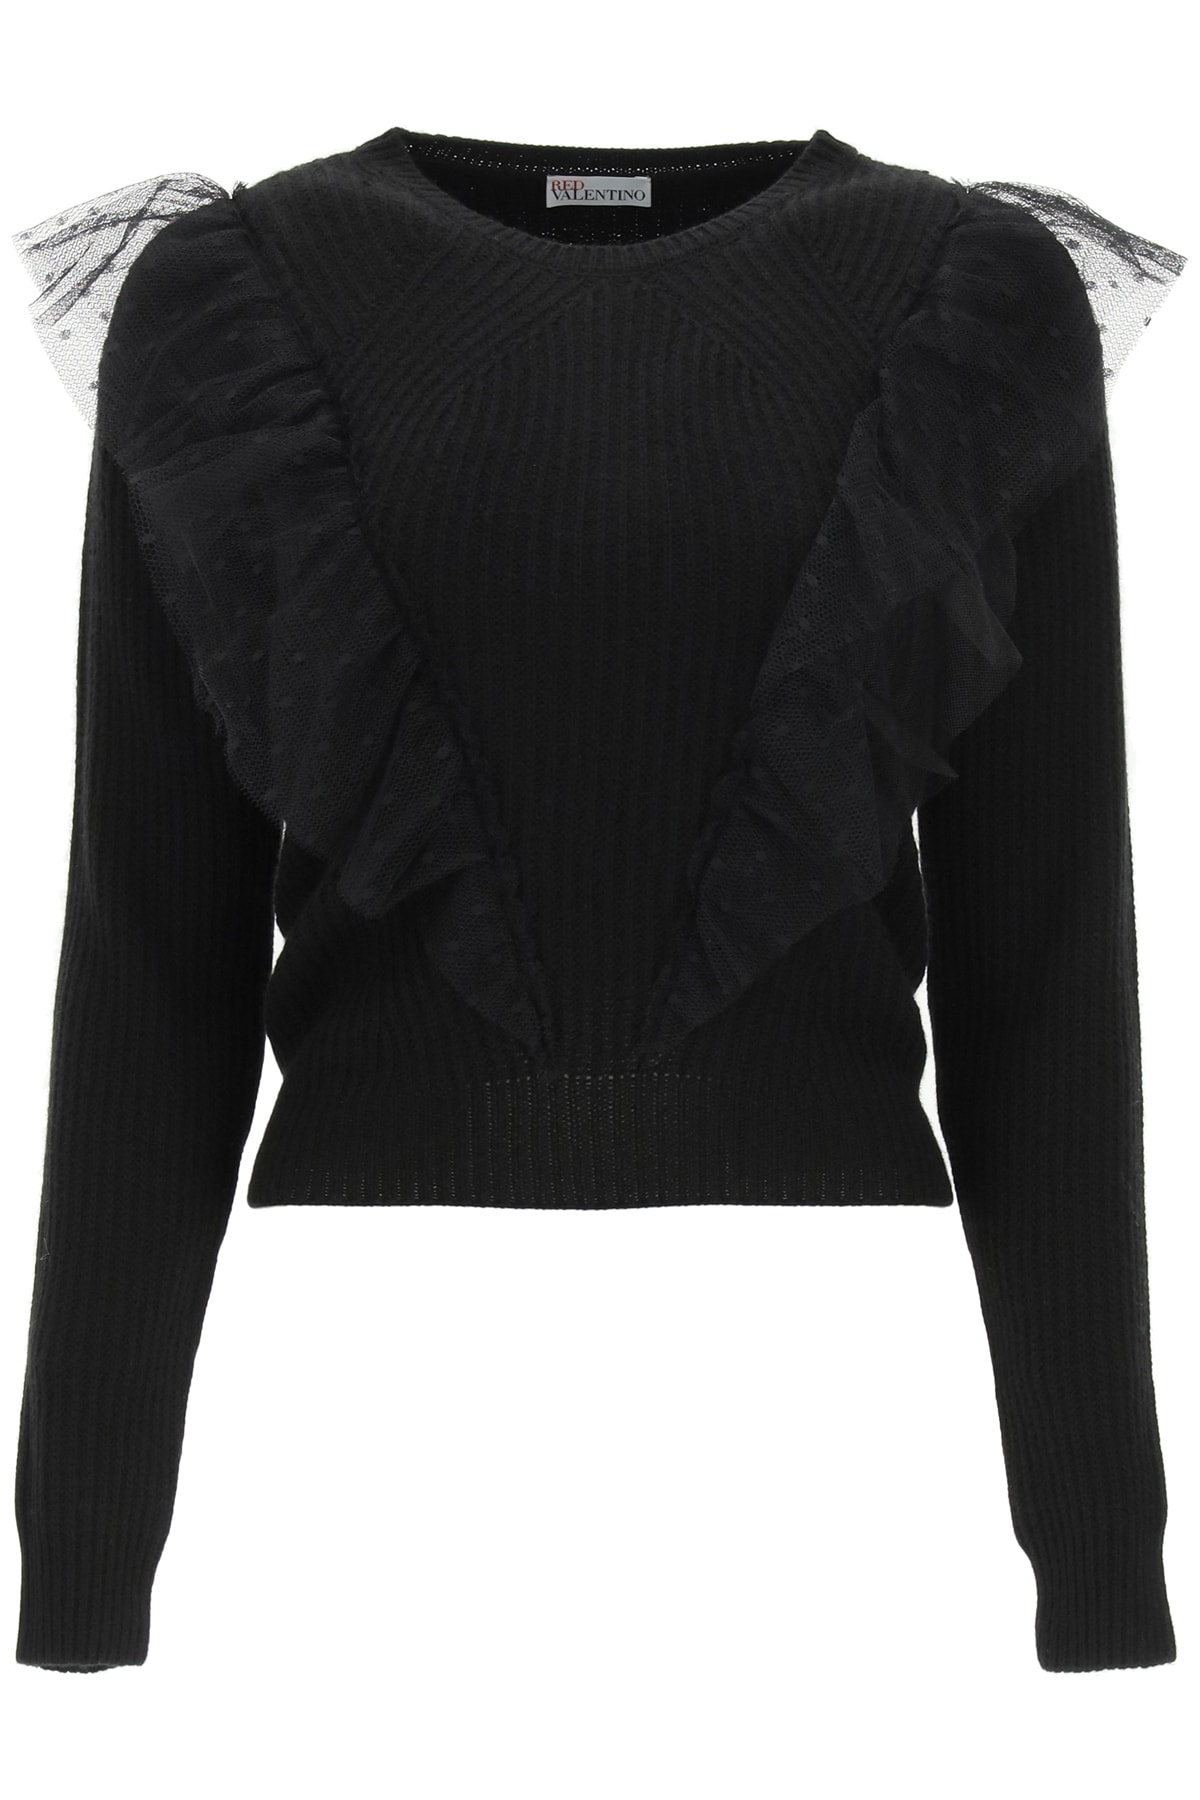 RED Valentino Sweater With Point Desprit Ruffles